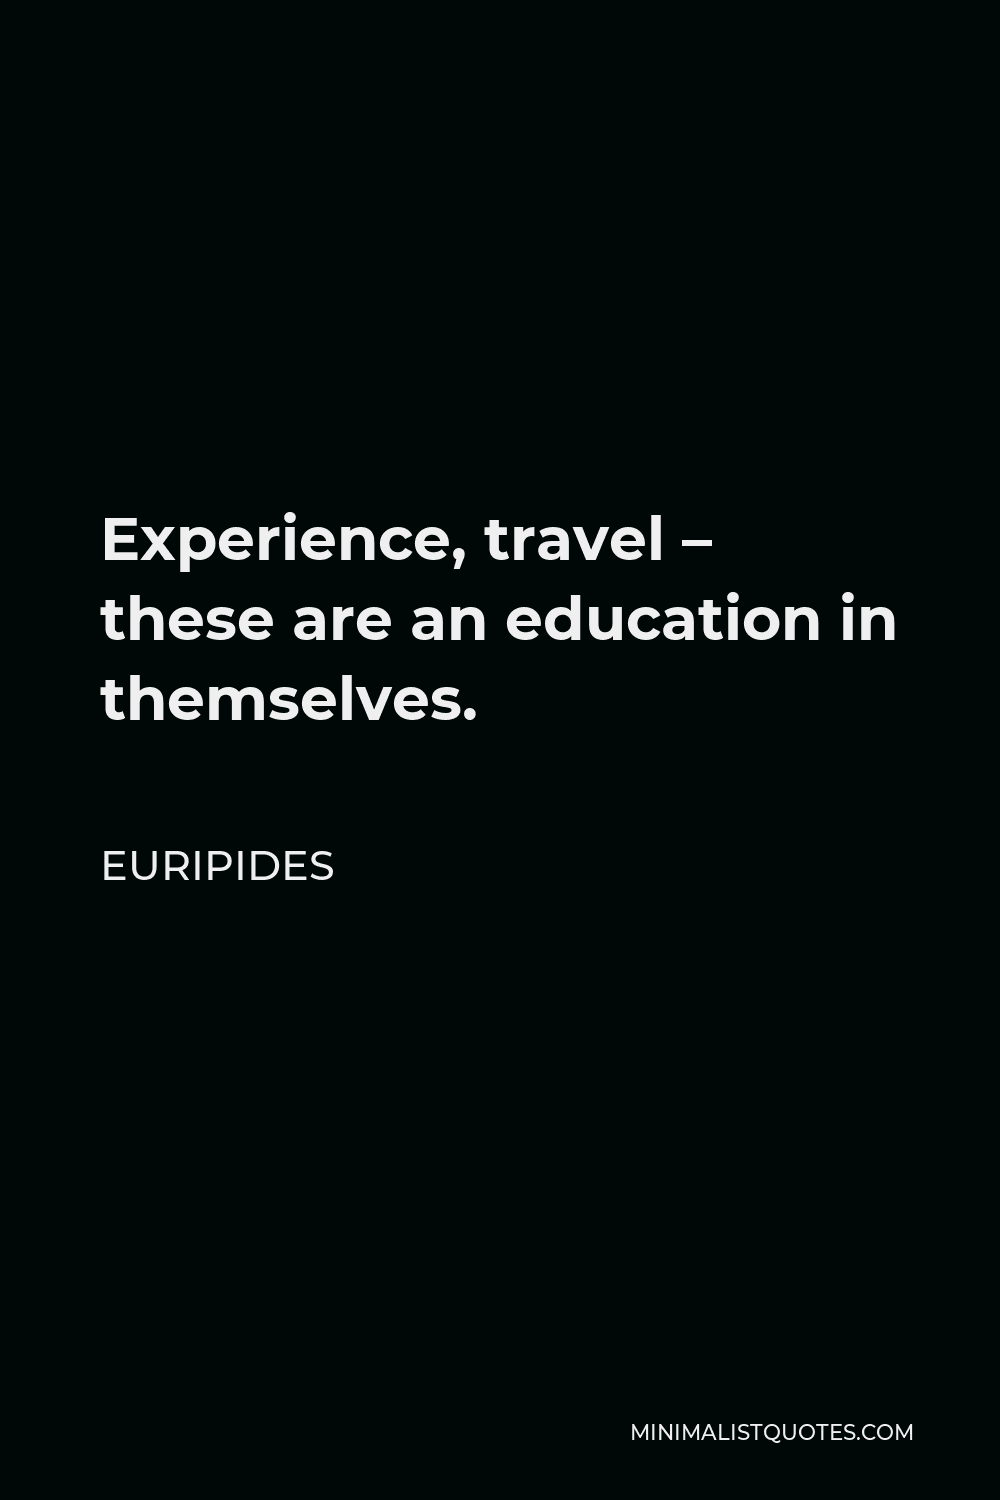 Euripides Quote - Experience, travel – these are an education in themselves.